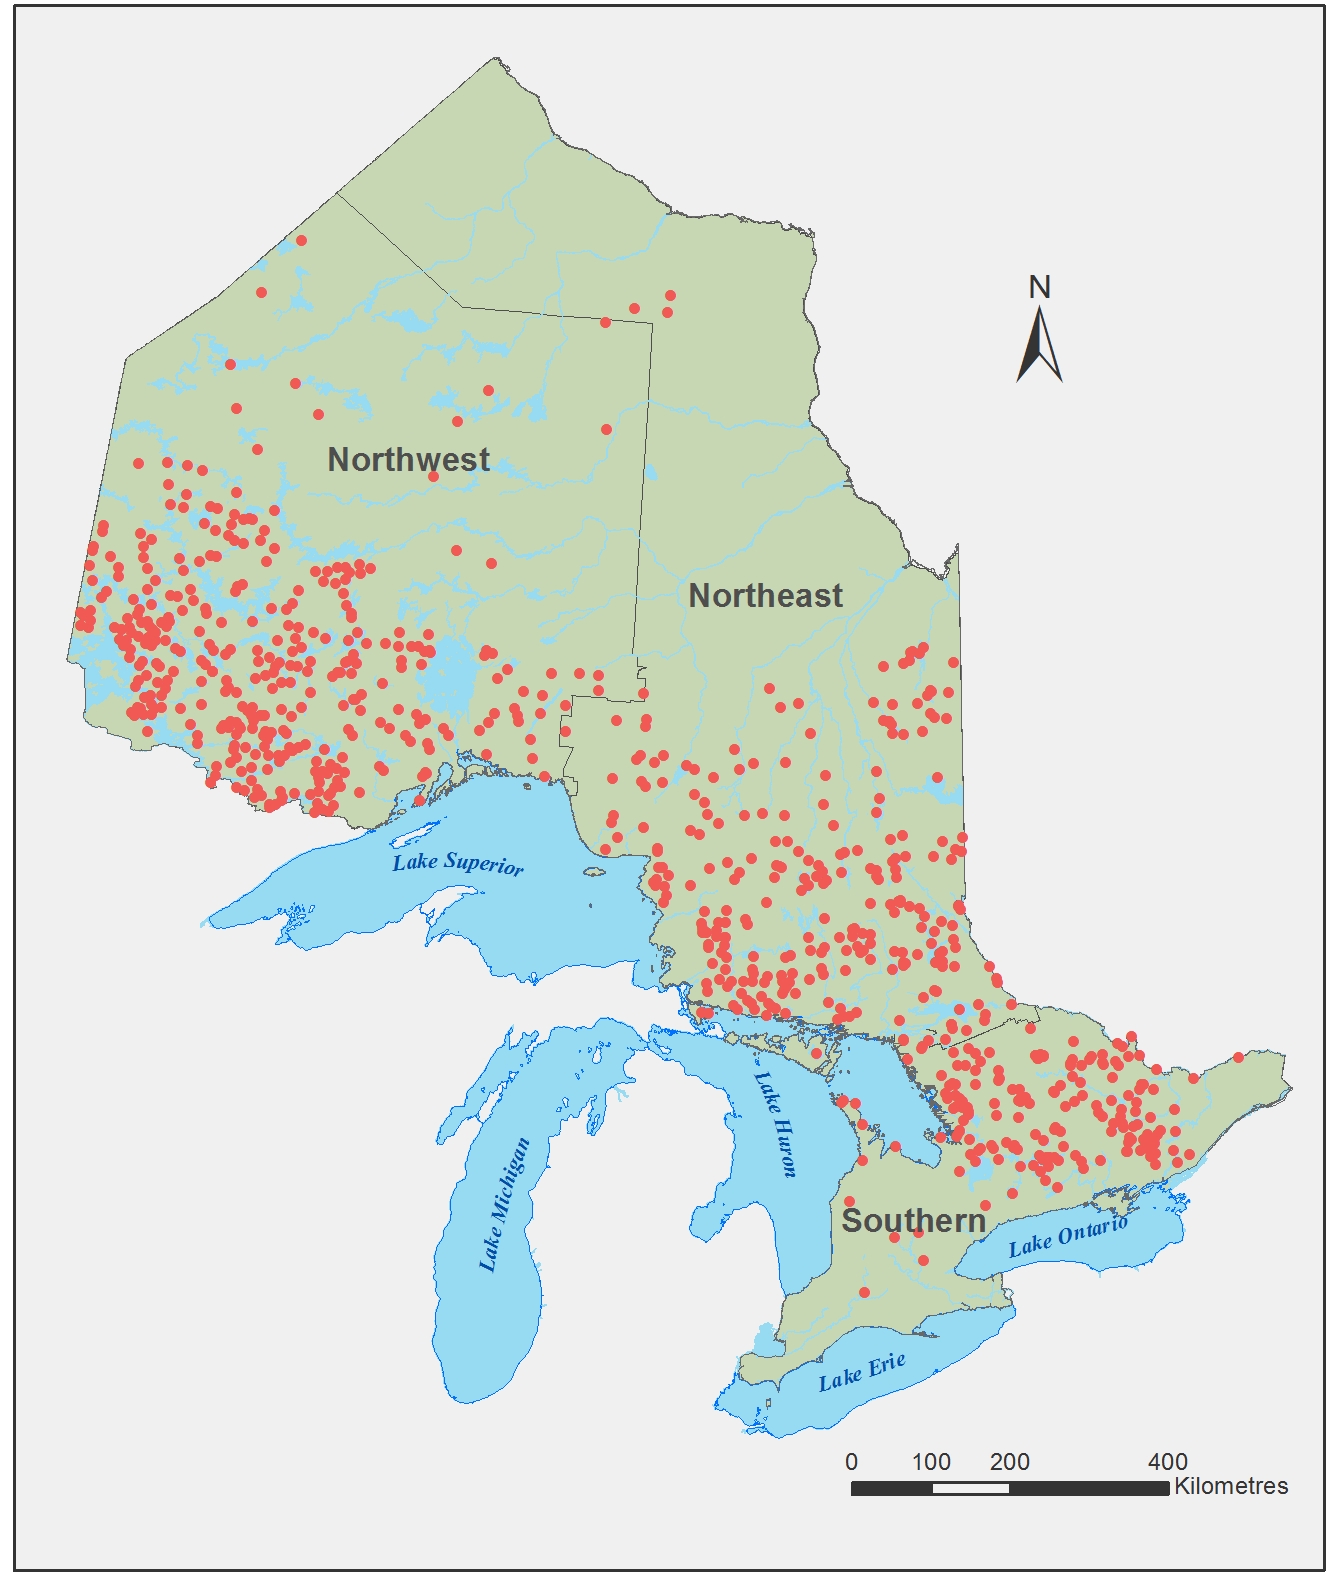 Figure 11: A map of Ontario showing the location of BSM lakes sampled during the first cycle (2008-2012). Three MNRF regional boundaries are also shown on the map (i.e., northeast, northwest and south).